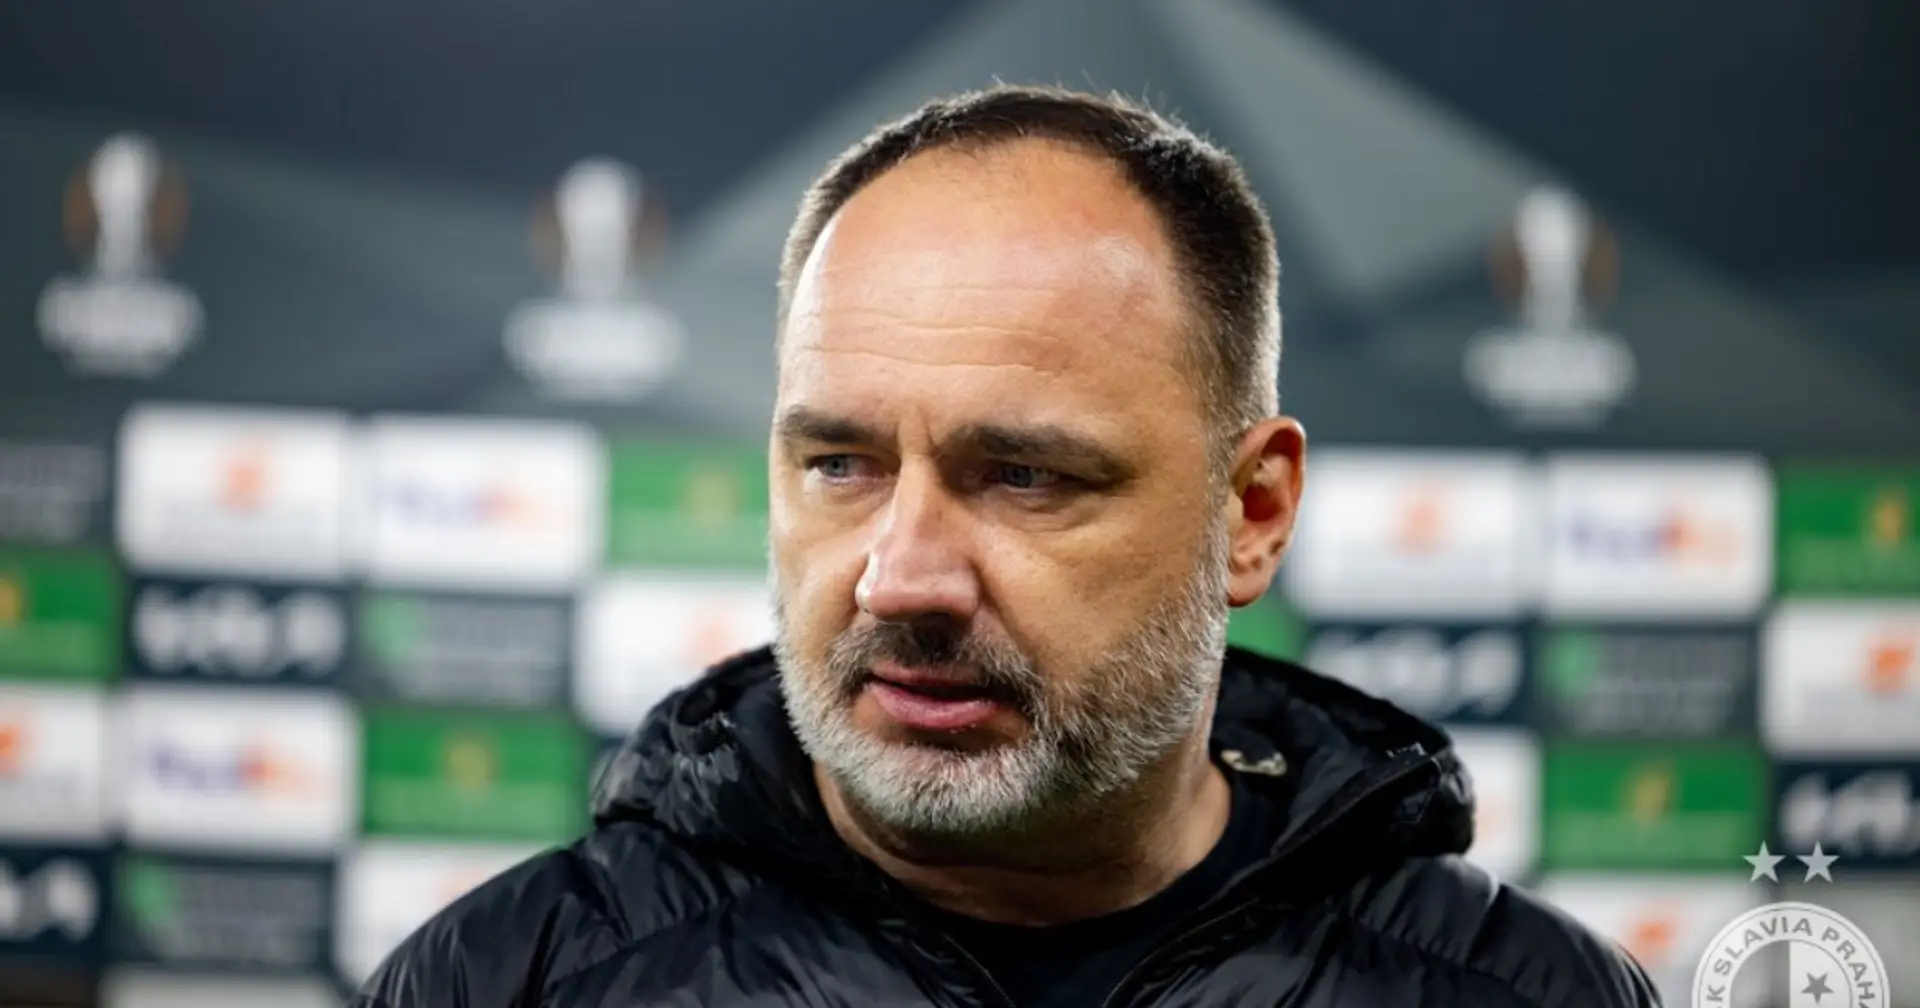 Slavia Prague boss Trpisovsky: 'History certainly motivates us. Our dream is to make it to the finals'